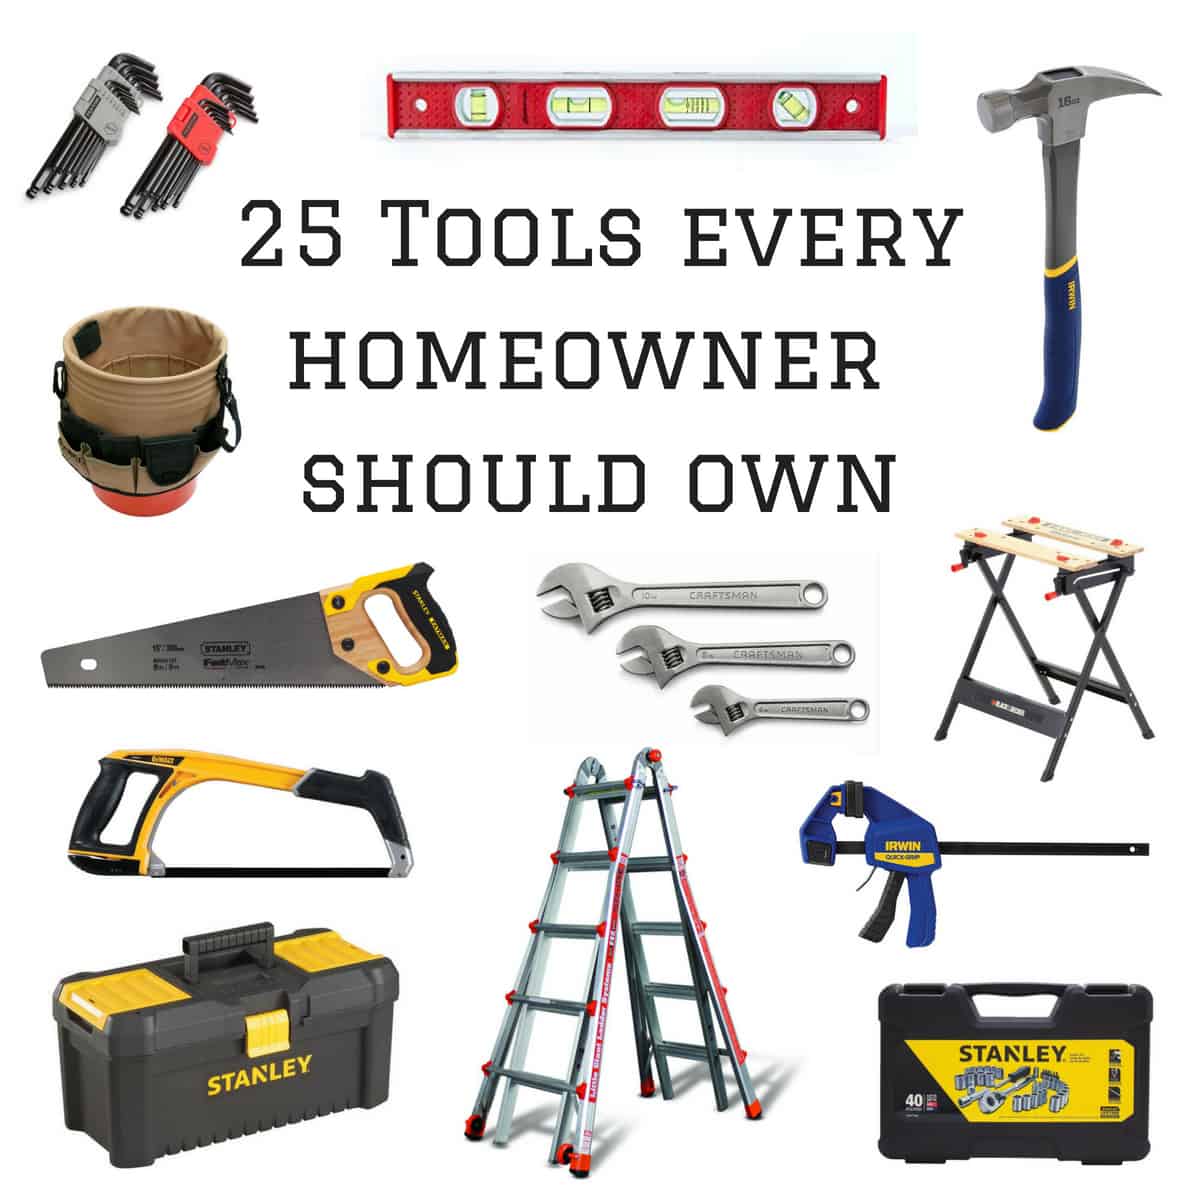 These 8 Tools Are Must-Haves for DIY Projects